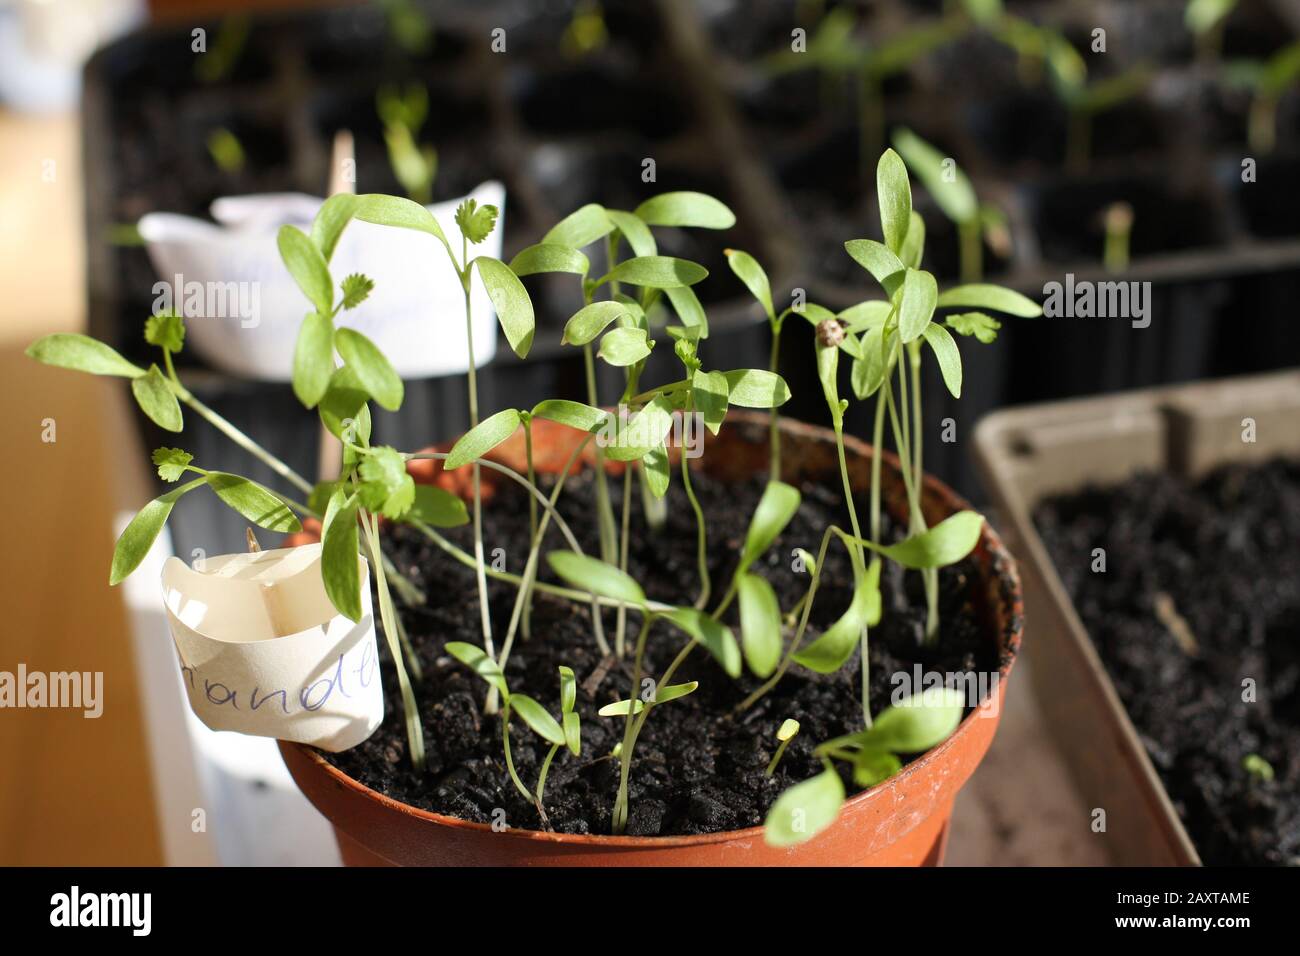 Coriander seeds germinate and grow indoors. Planting at home urban gardening Stock Photo